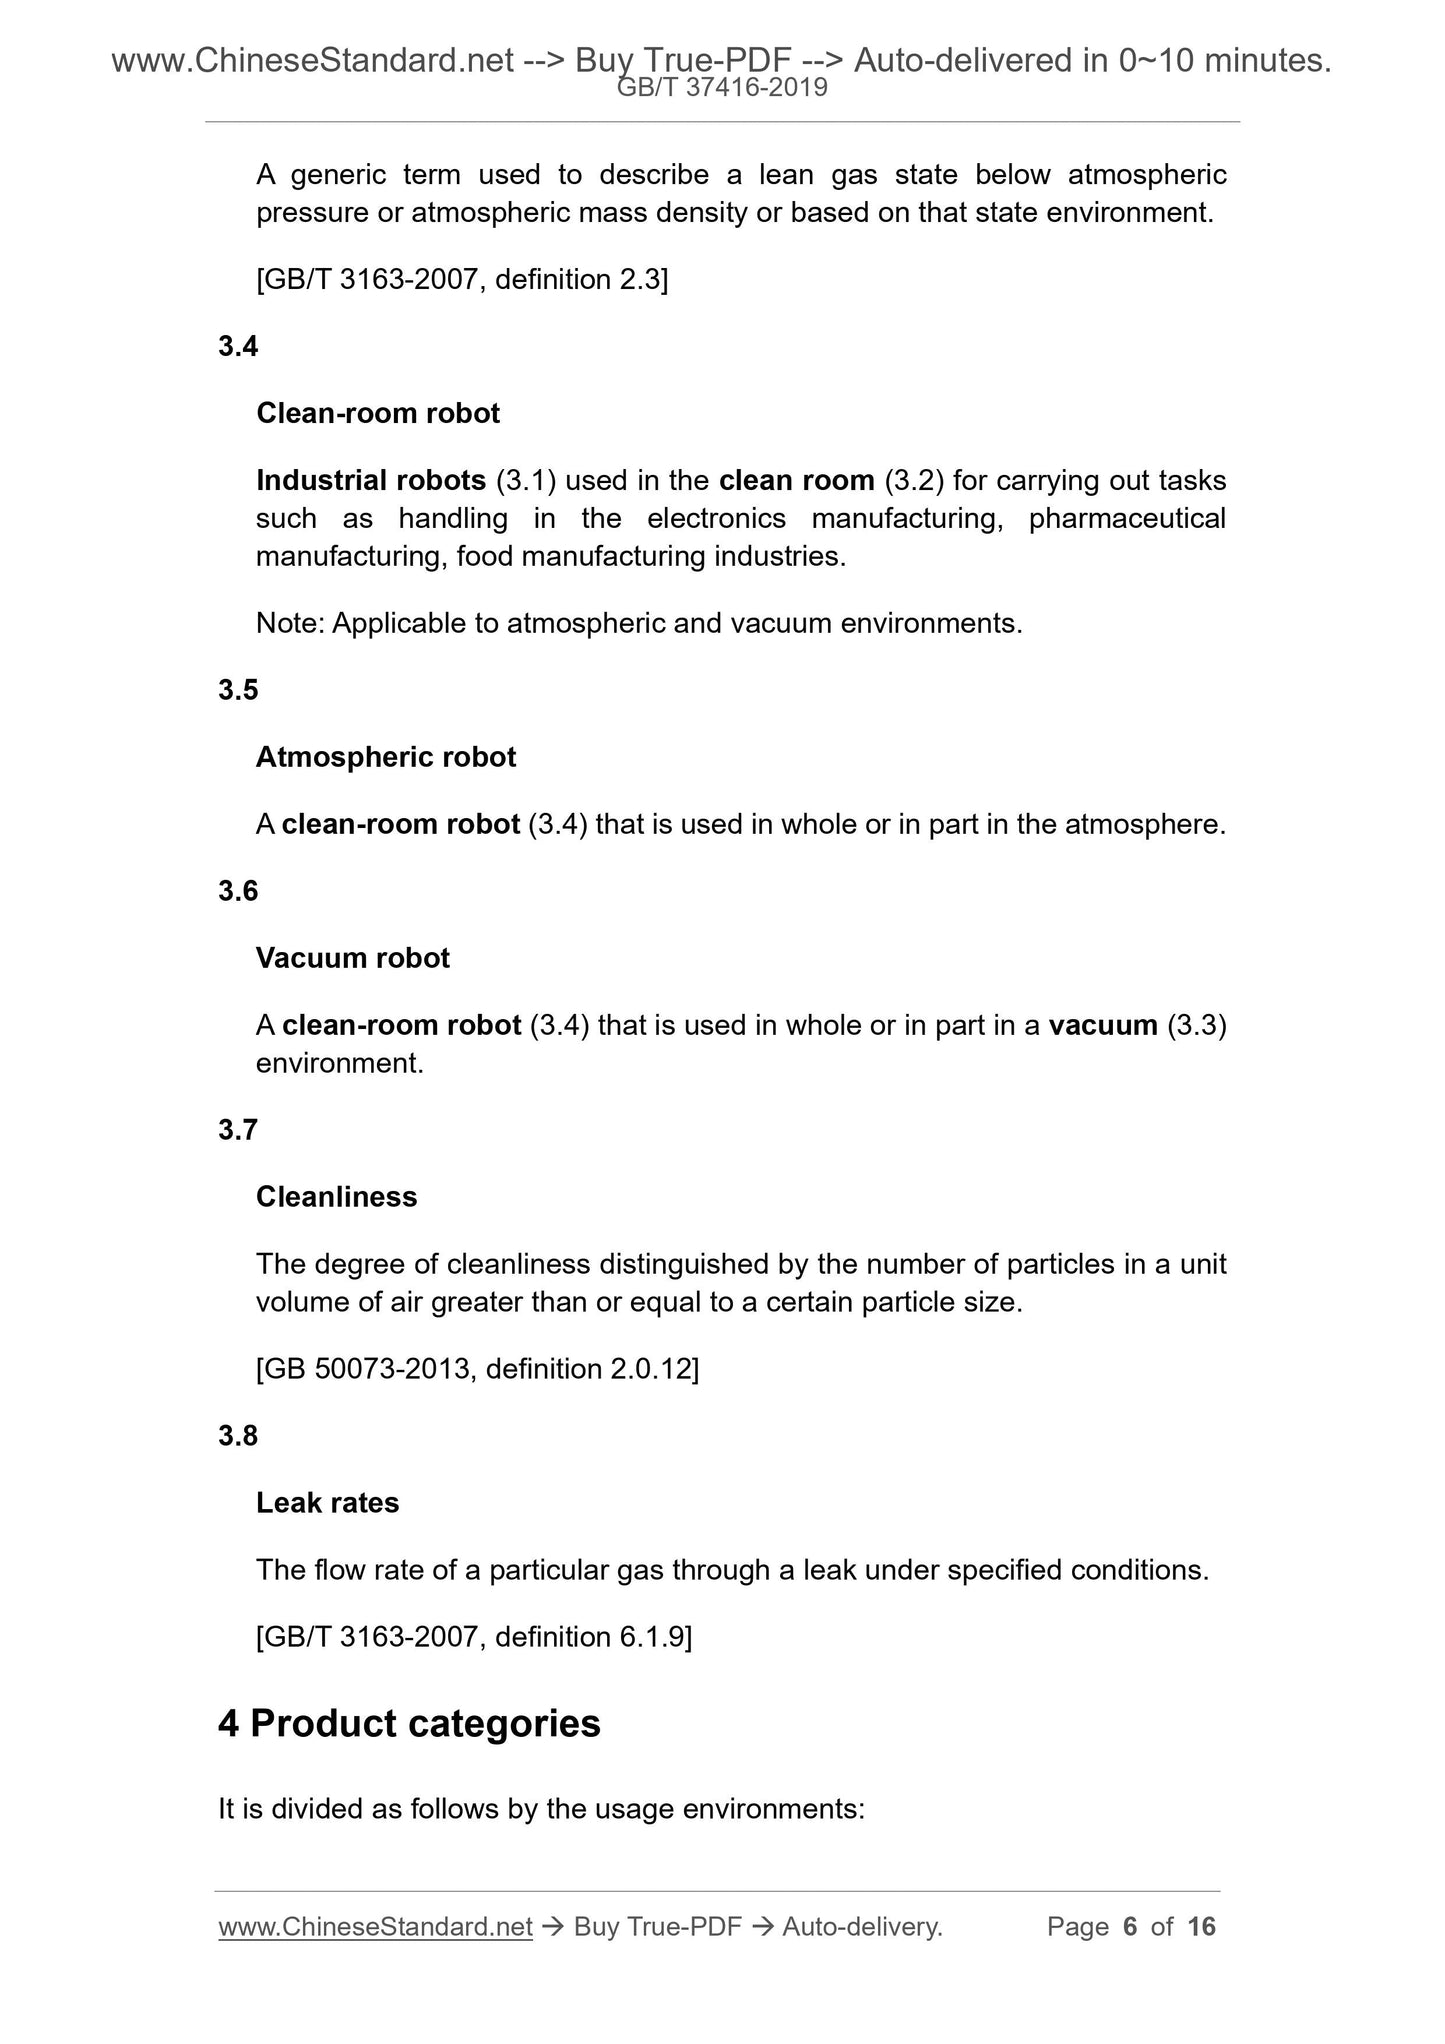 GB/T 37416-2019 Page 4